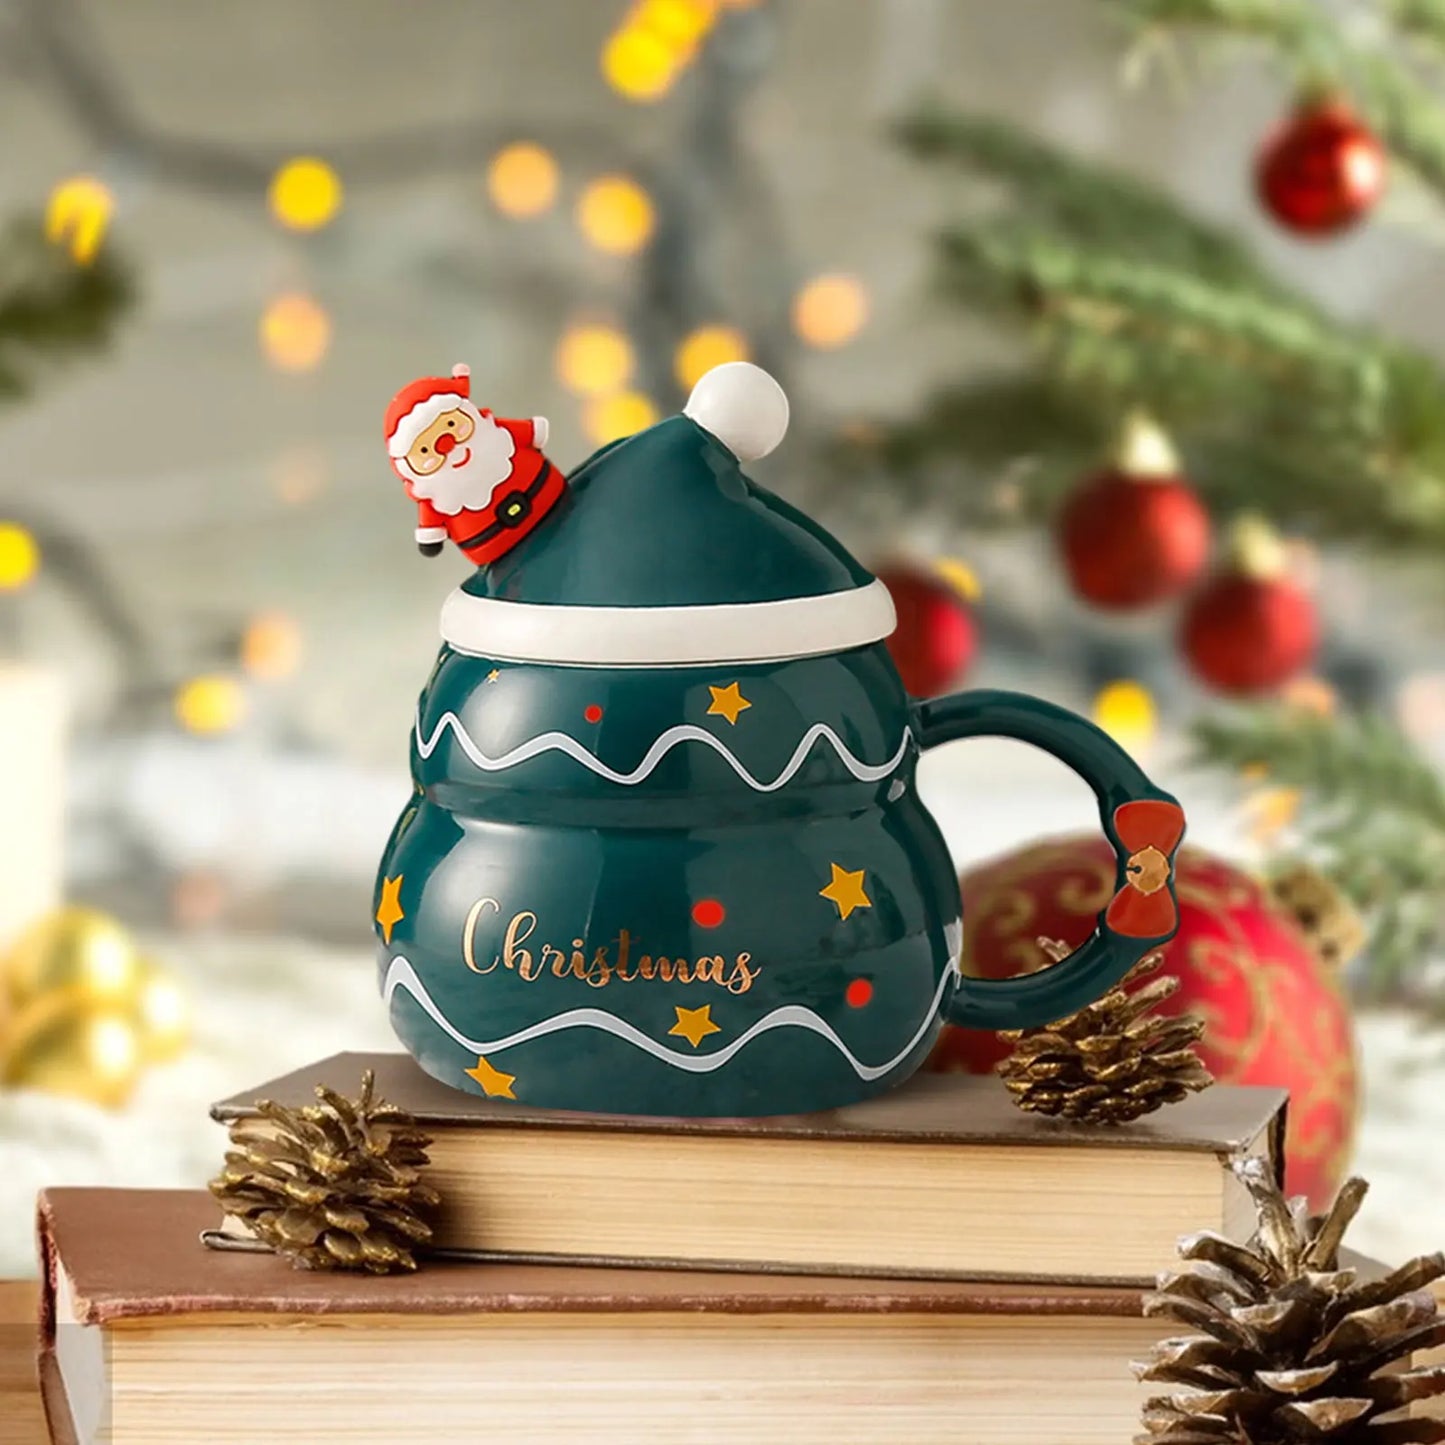 Christmas Coffee Mug with Santa Claus Figurine Novelty Juice Water Cups Reusable for Home Daily Using Birthday Gift Office